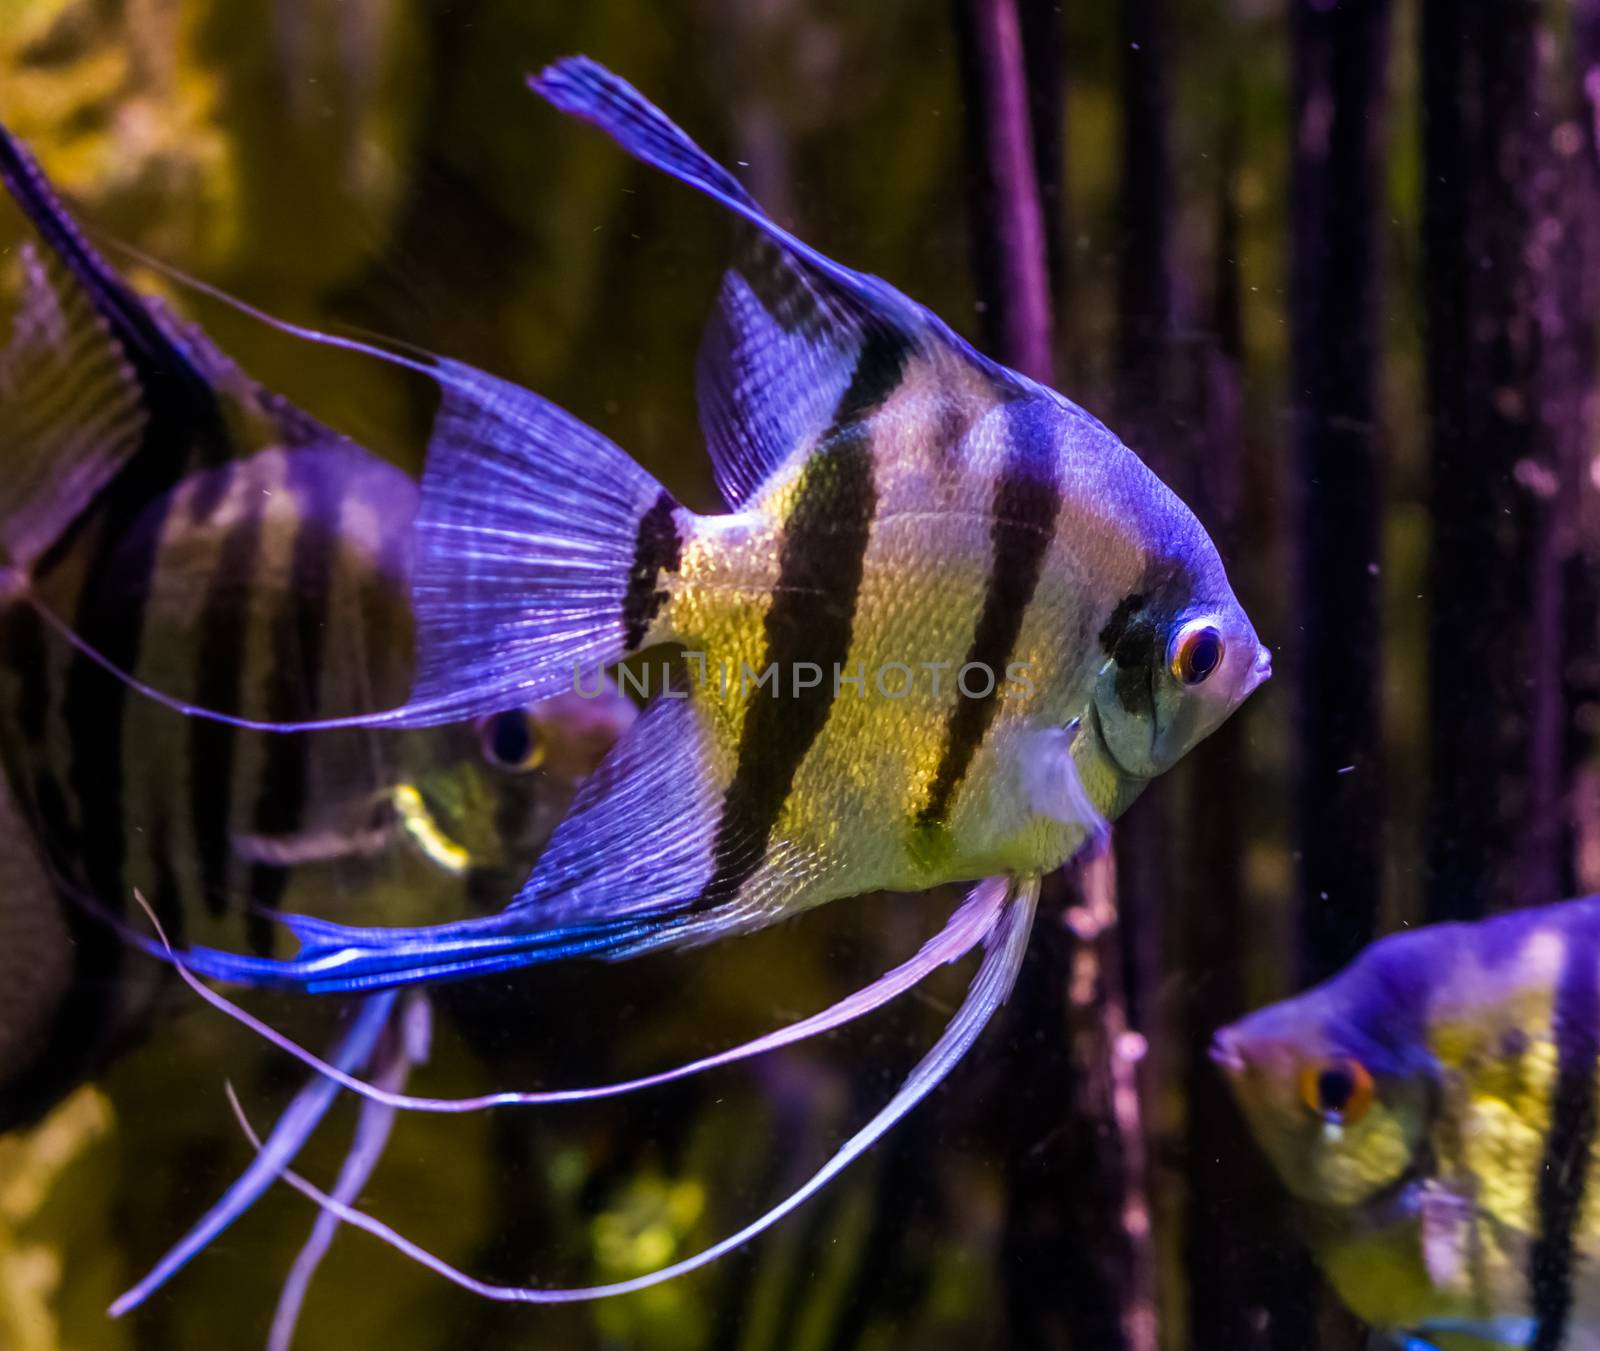 freshwater angelfishes swimming in the water, closeup of angelfish, popular pets in aquaculture, tropical fish from the amazon basin